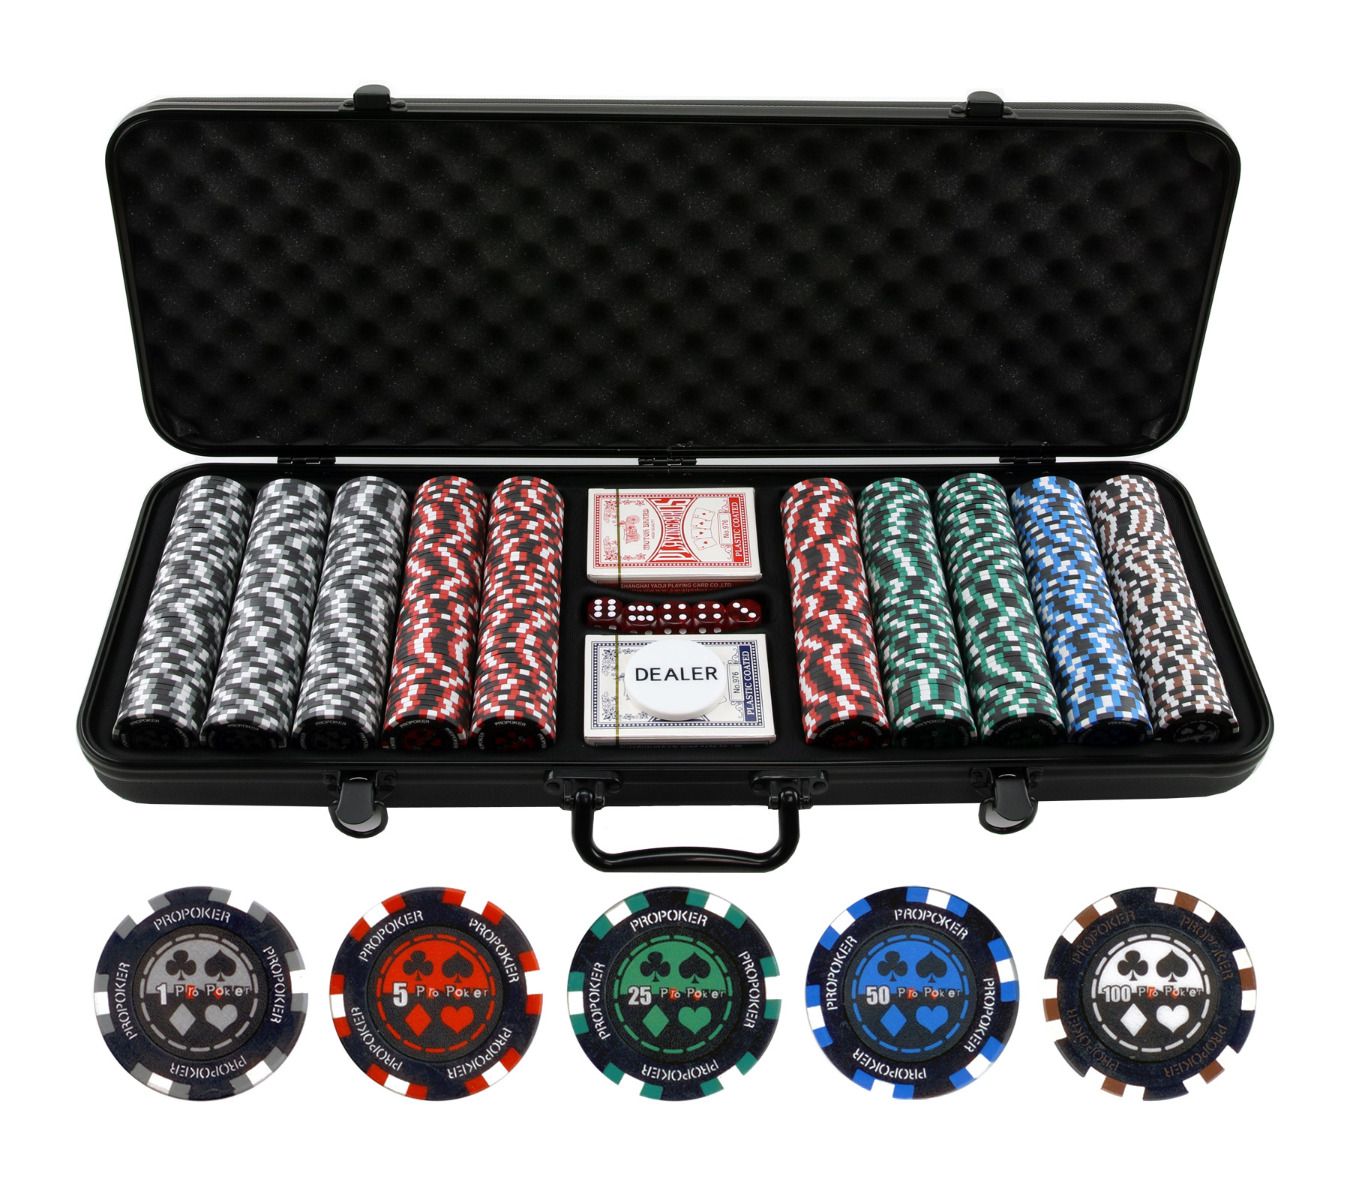 Pro Poker Clay Poker Chips Set from Discount Shop